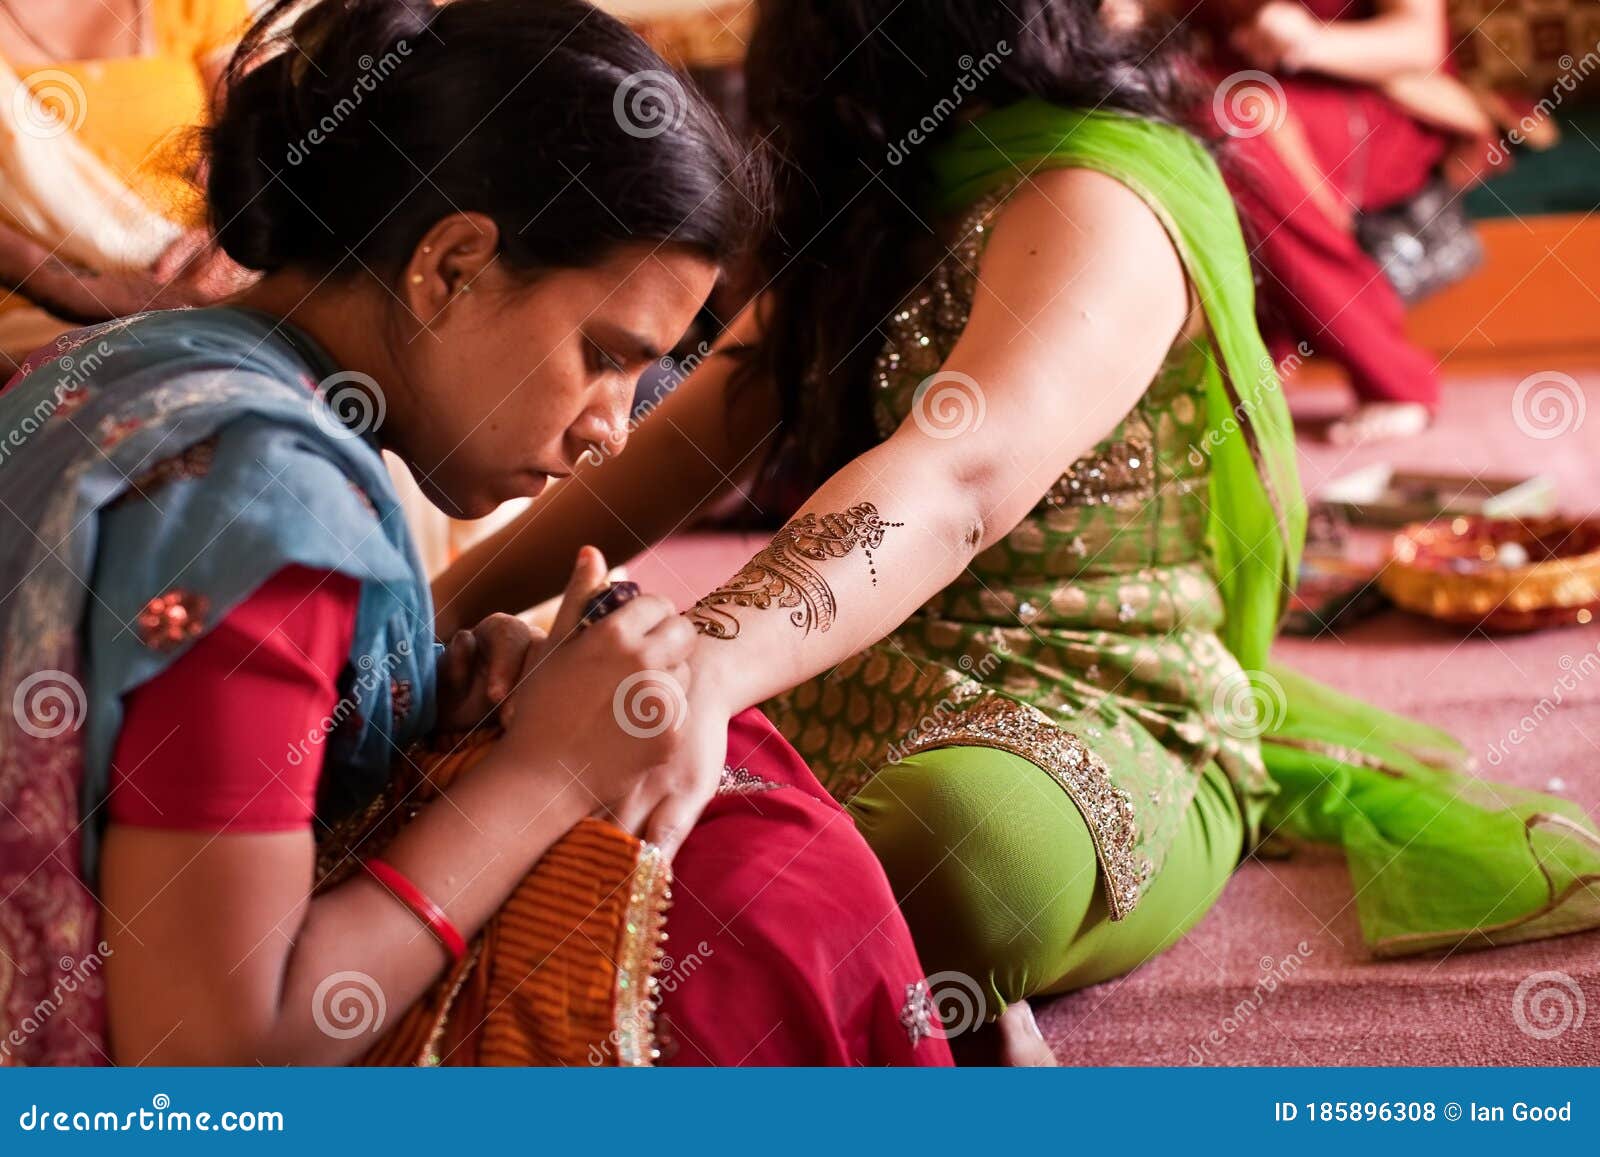 Indian Henna Tattoo Artist at Work Editorial Stock Photo - Image of female,  traditional: 185896308